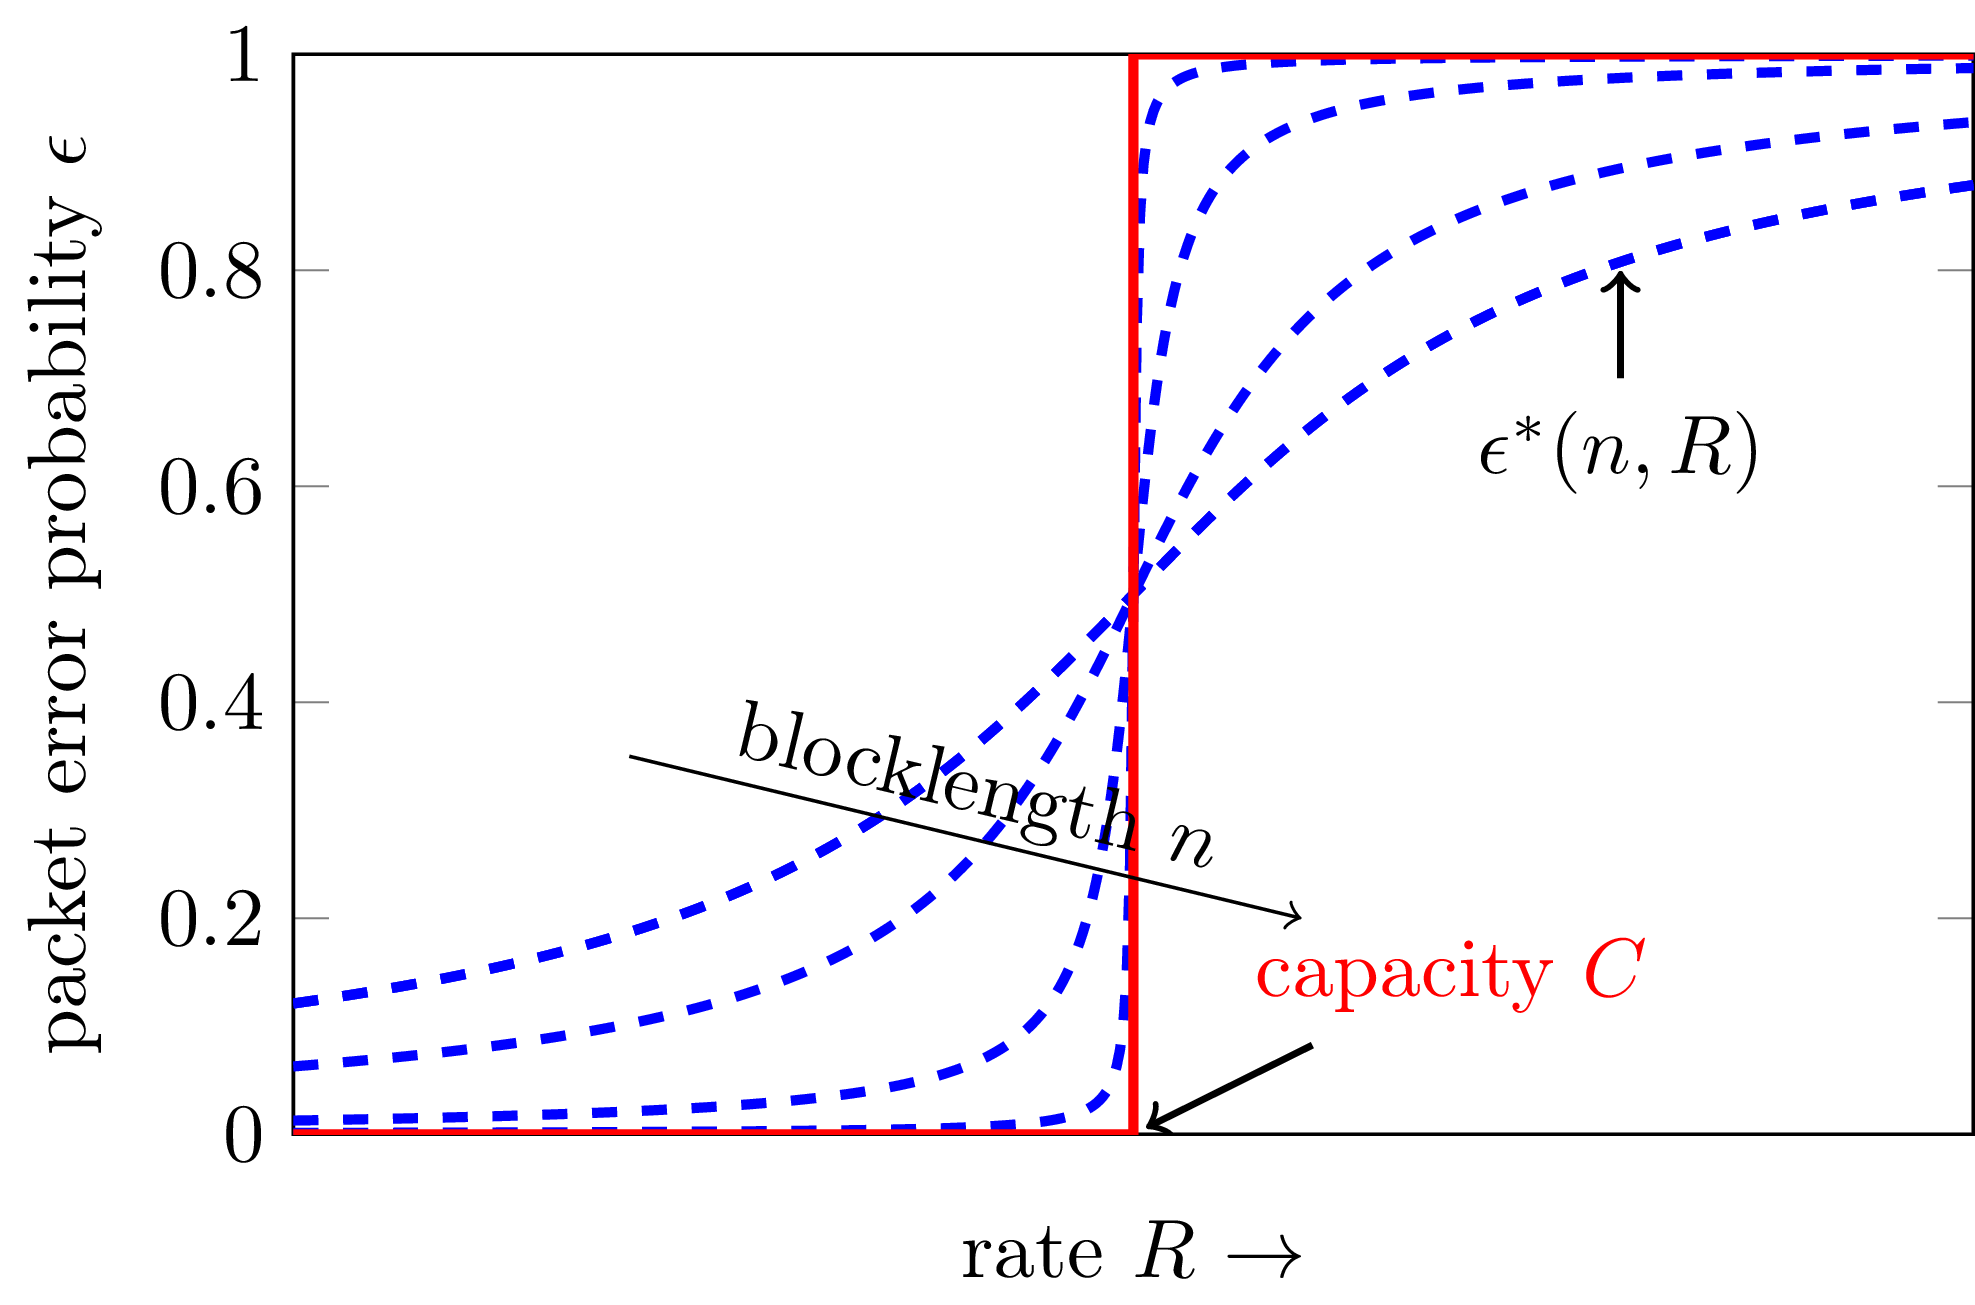 Error probability as a function of the rate